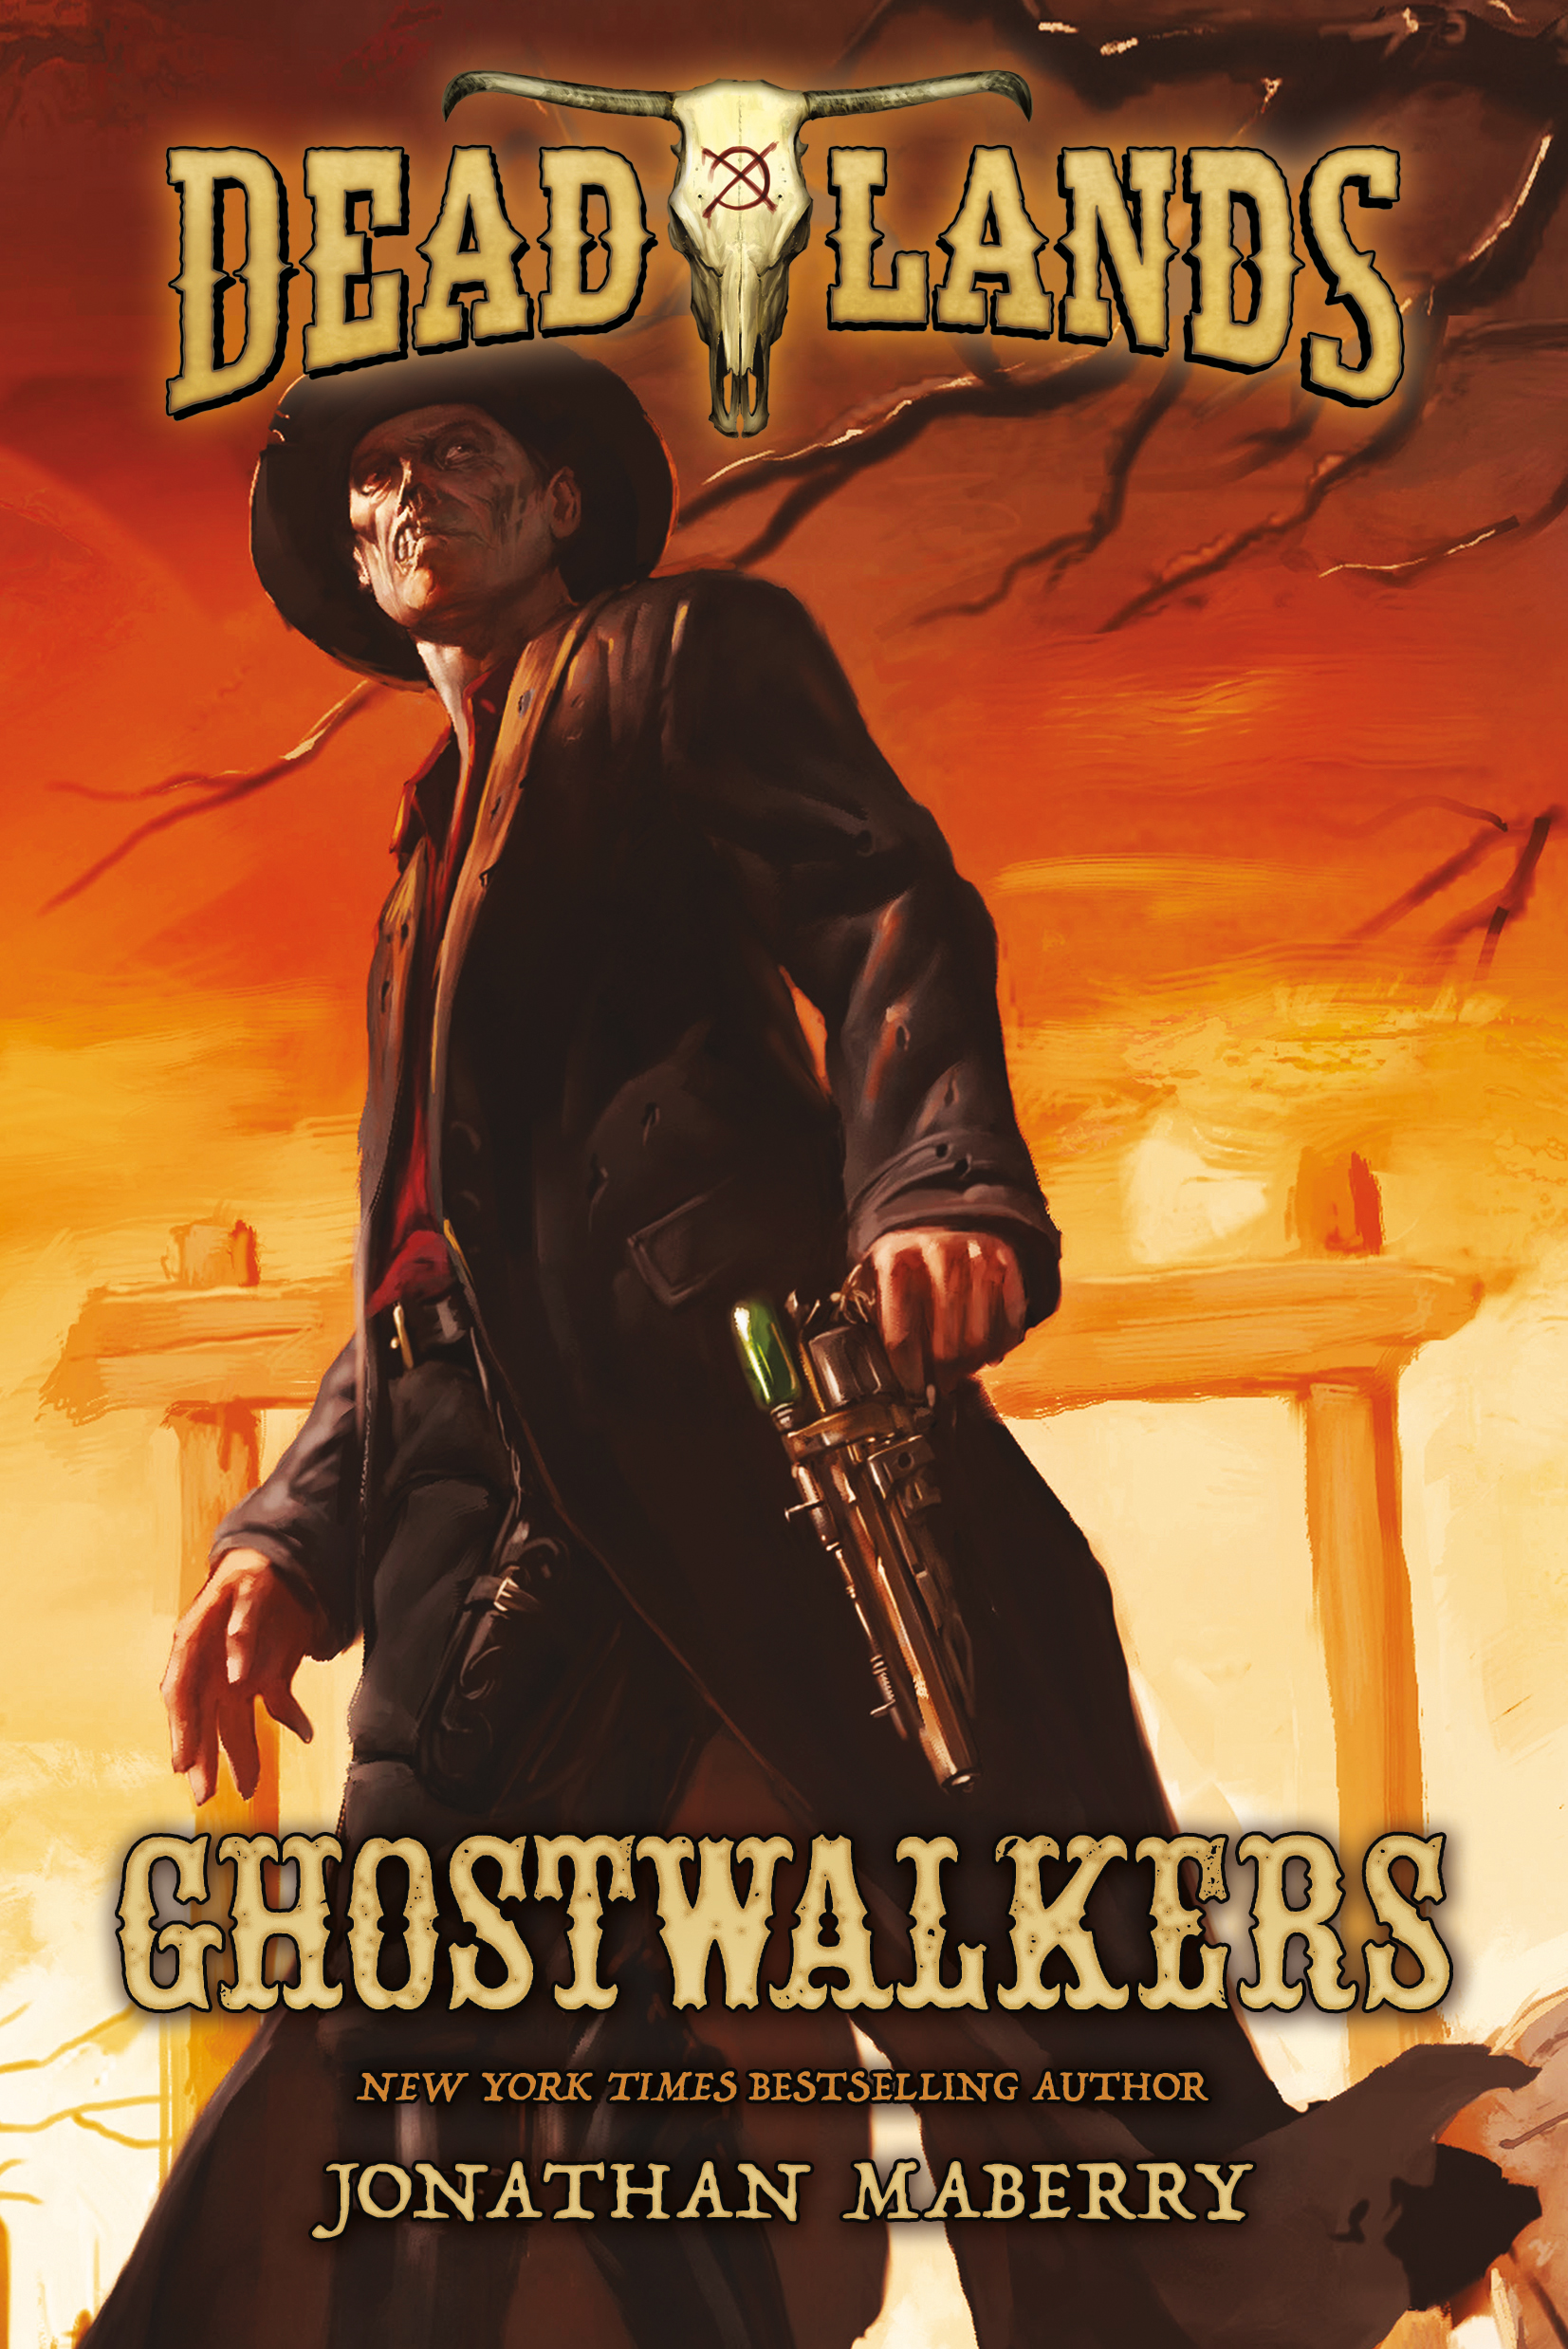 Deadlands: Ghostwalkers by Jonathan Maberry, Ray Porter